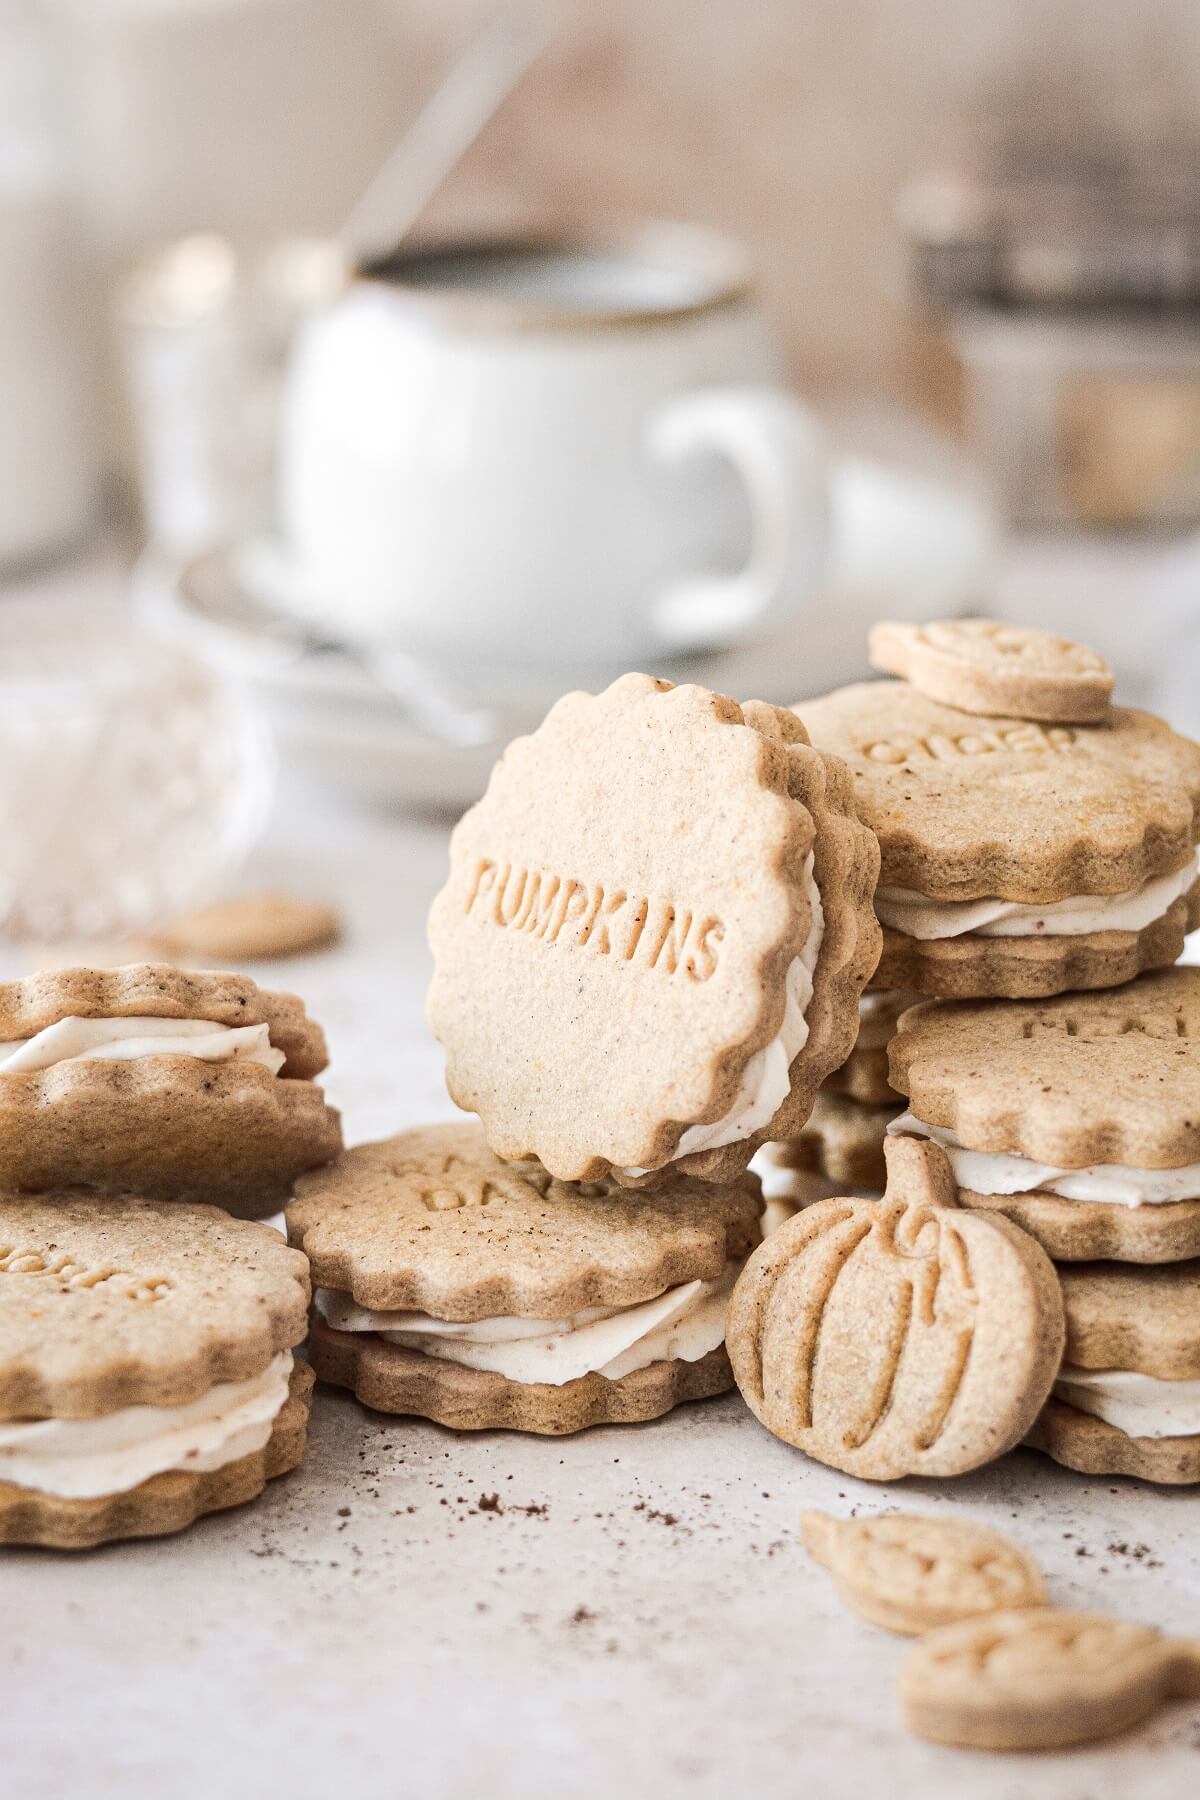 Pumpkin spice shortbread cookie sandwiches filled with buttercream.